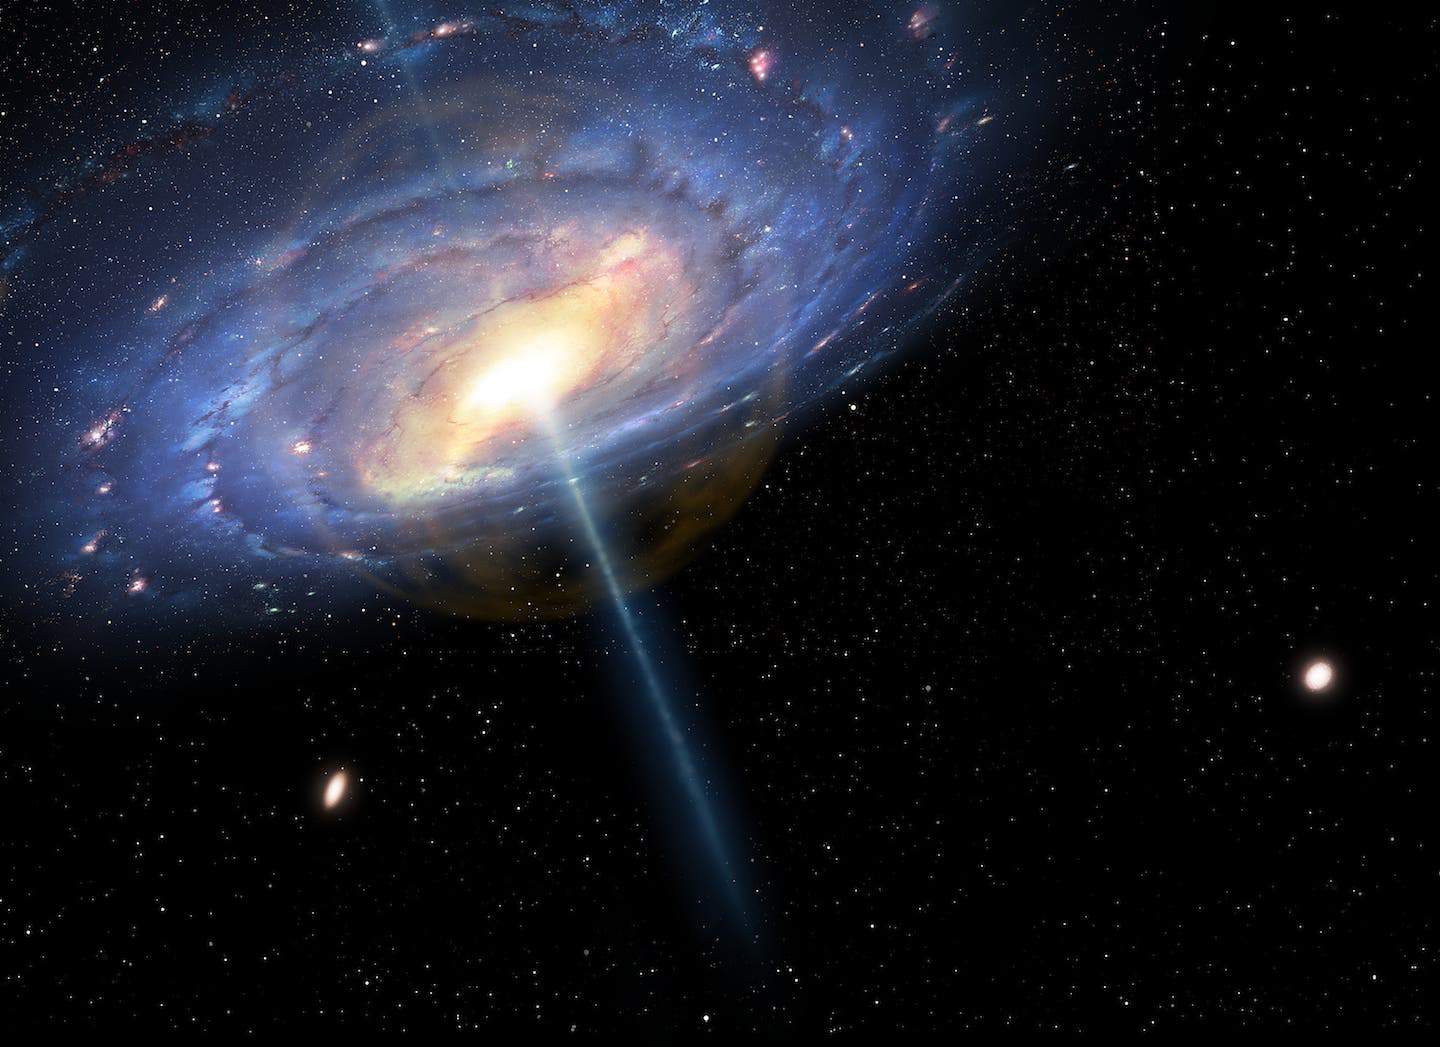 An artist's impression of the exploding quasar at the center of the Milky Way 6 million years ago. The wisps of orange at the center represent the gasless 